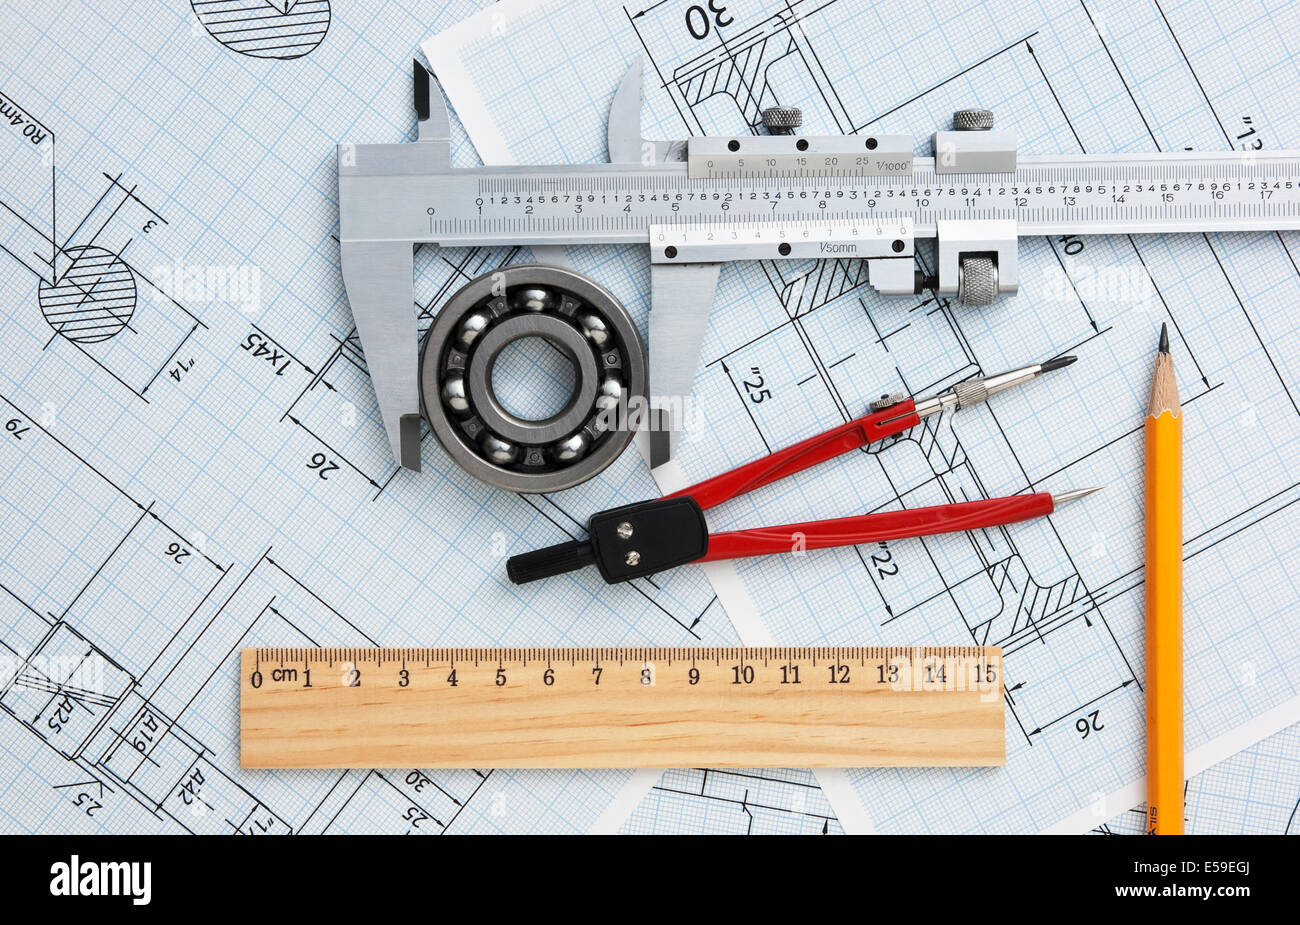 New and Innovative Technical Drawing Tools